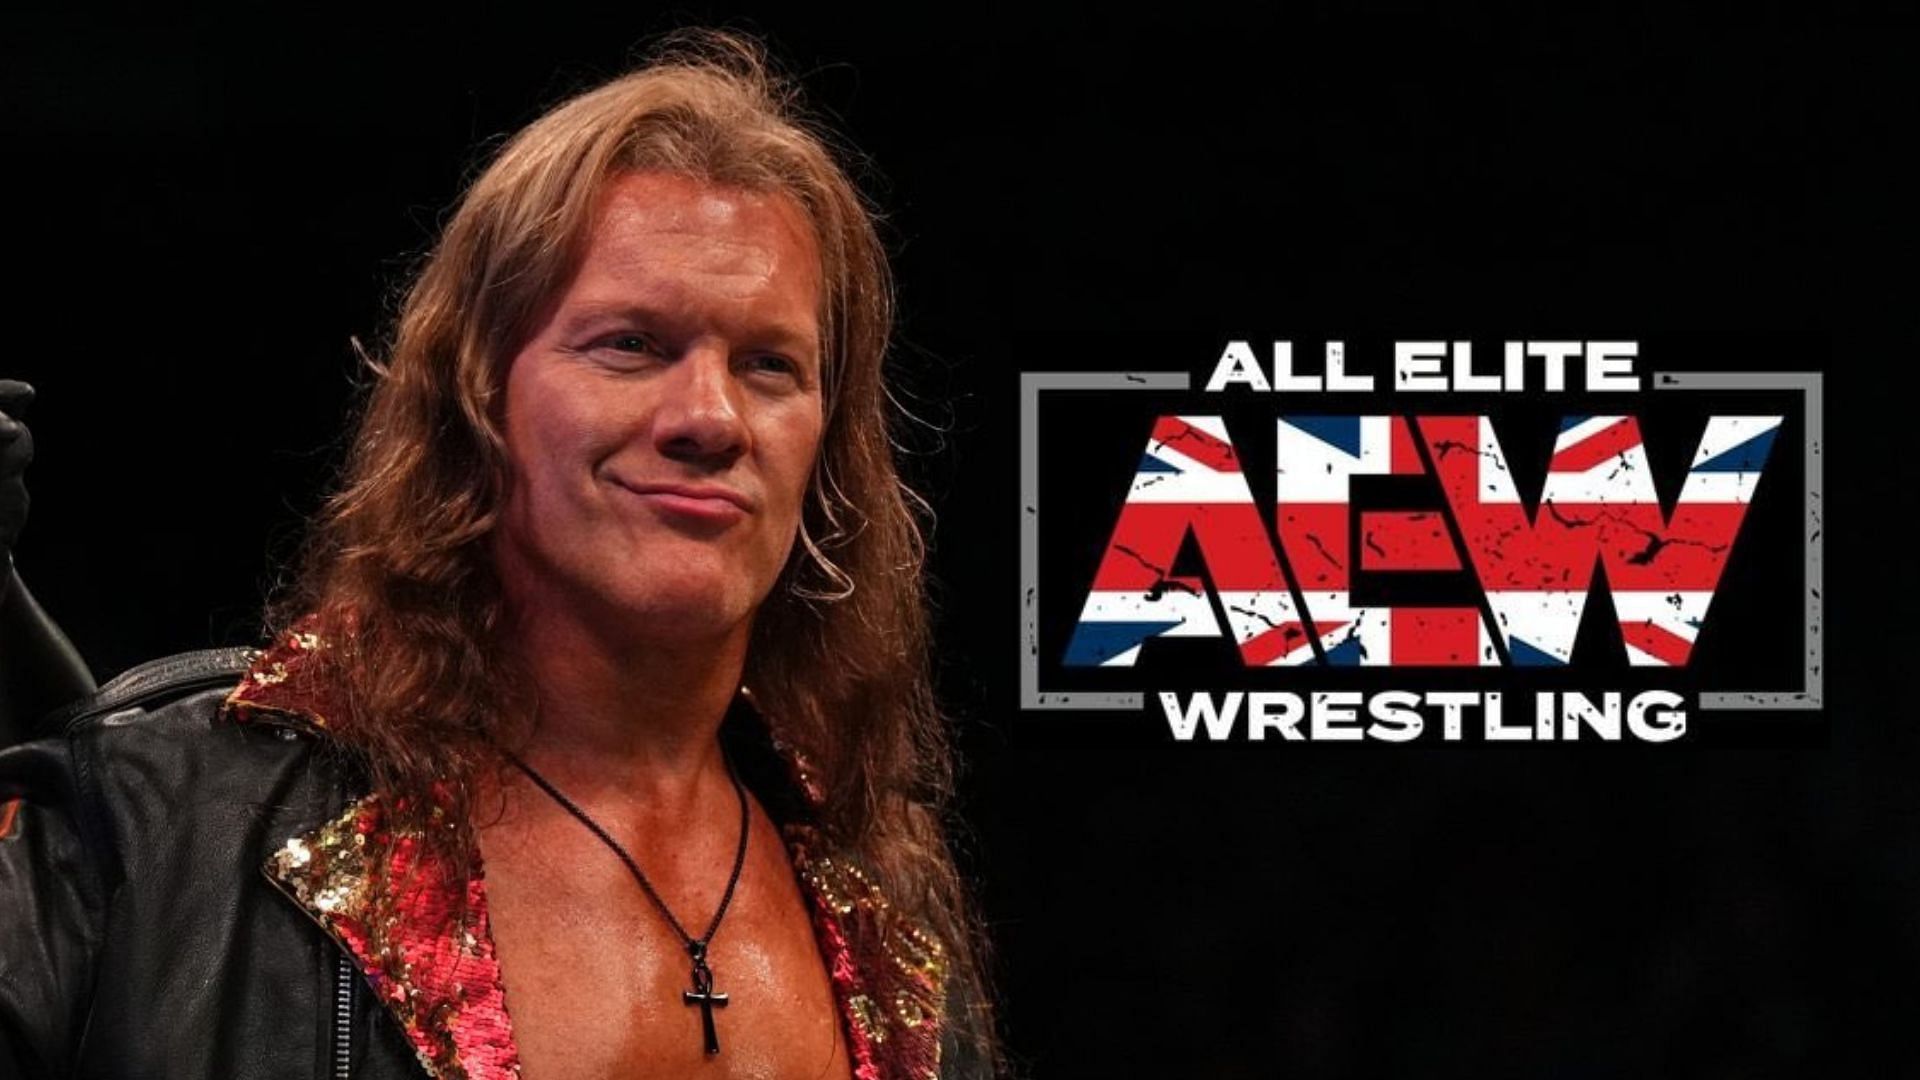 Chris Jericho has confirmed he wants a top British star to appear on AEW